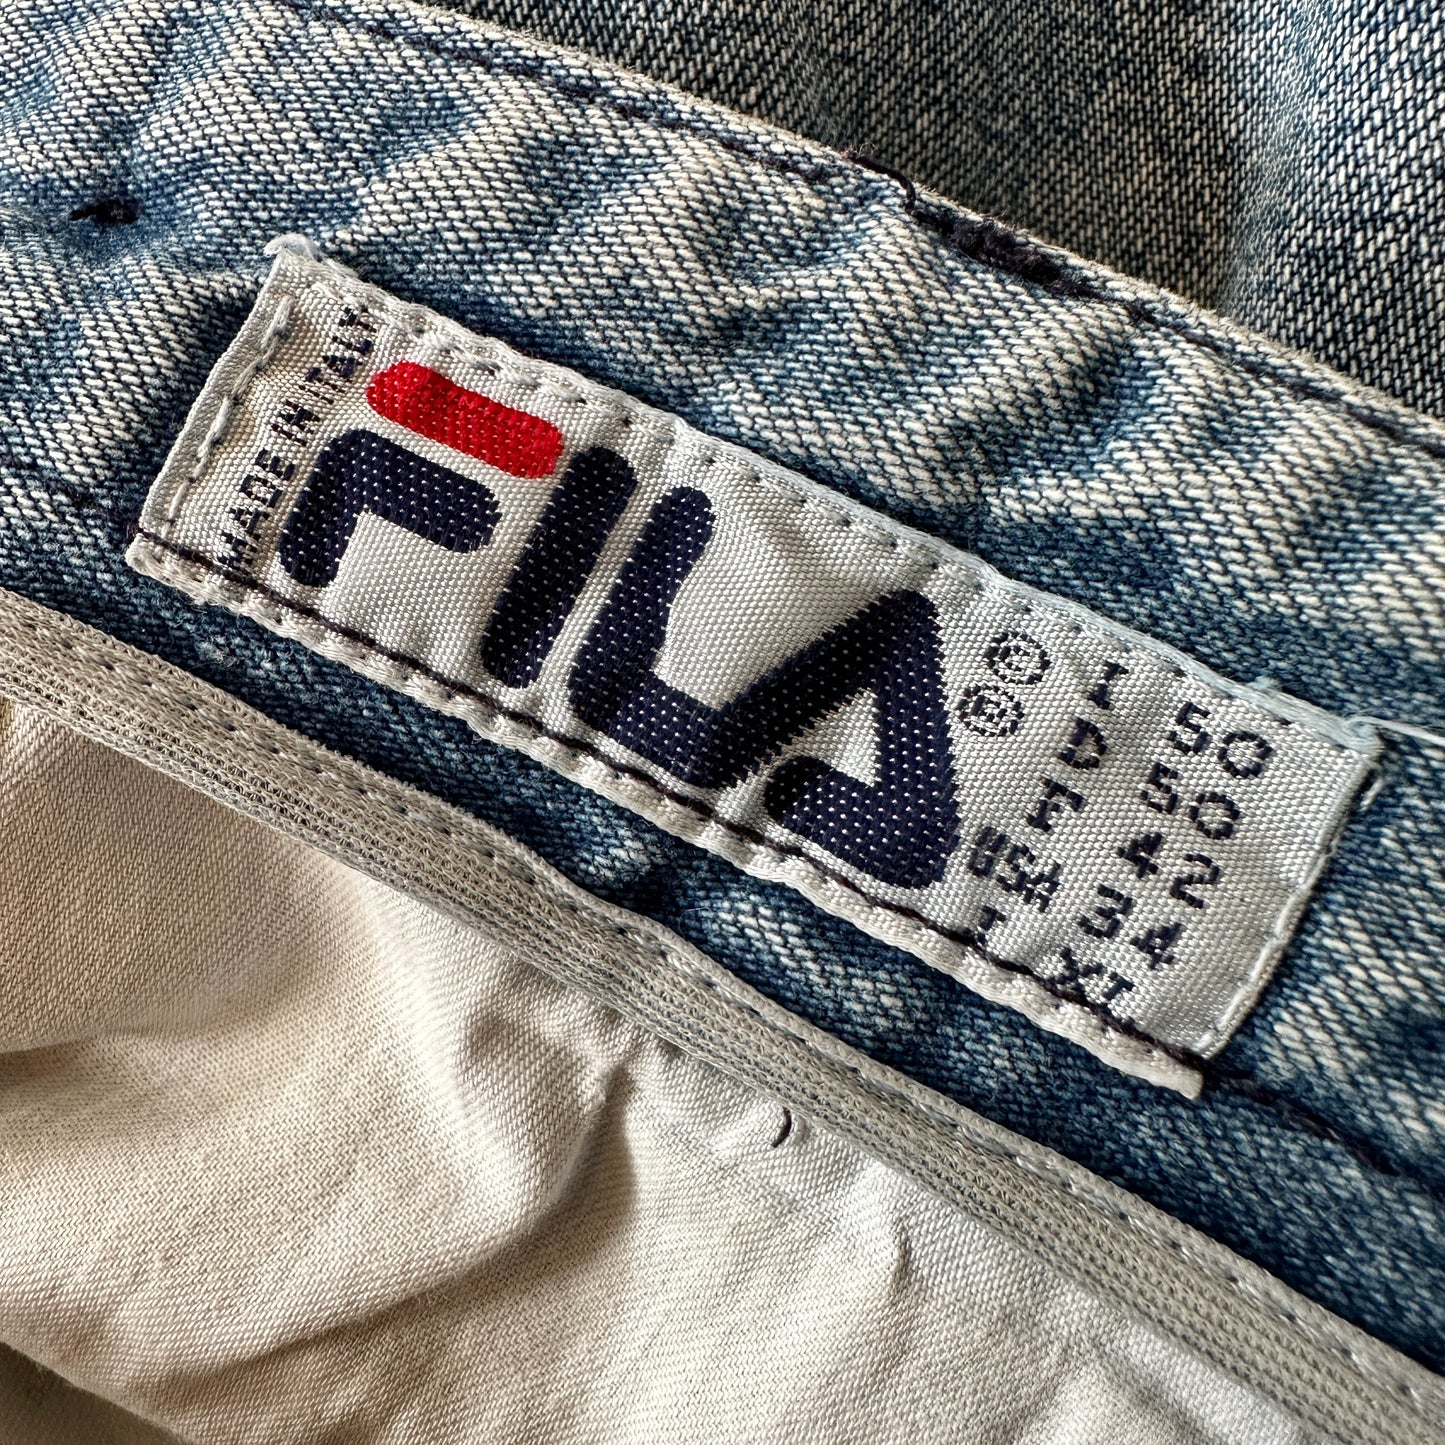 Fila Vintage 80s Tennis Shorts - 50 - Made in Italy